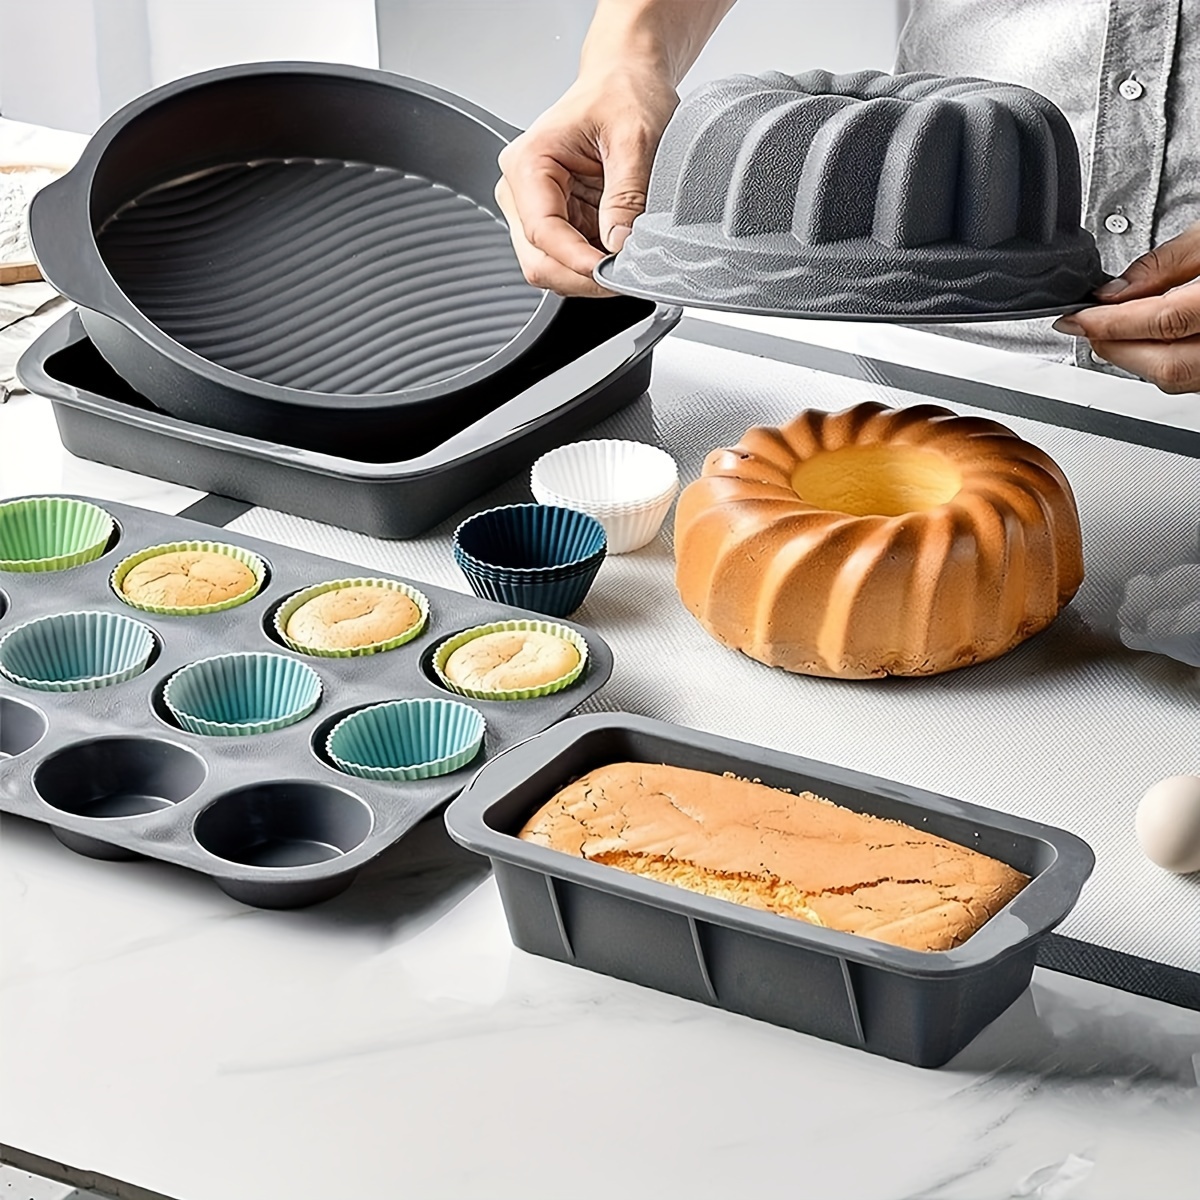 Walfos Silicone Mini Bread Baking Pan 6 Cavities Non-Stick Silicone Mini  Loaf Pans 2 Pieces Food Grade Baking Mold For Bread, Cakes, Muffin, Dough